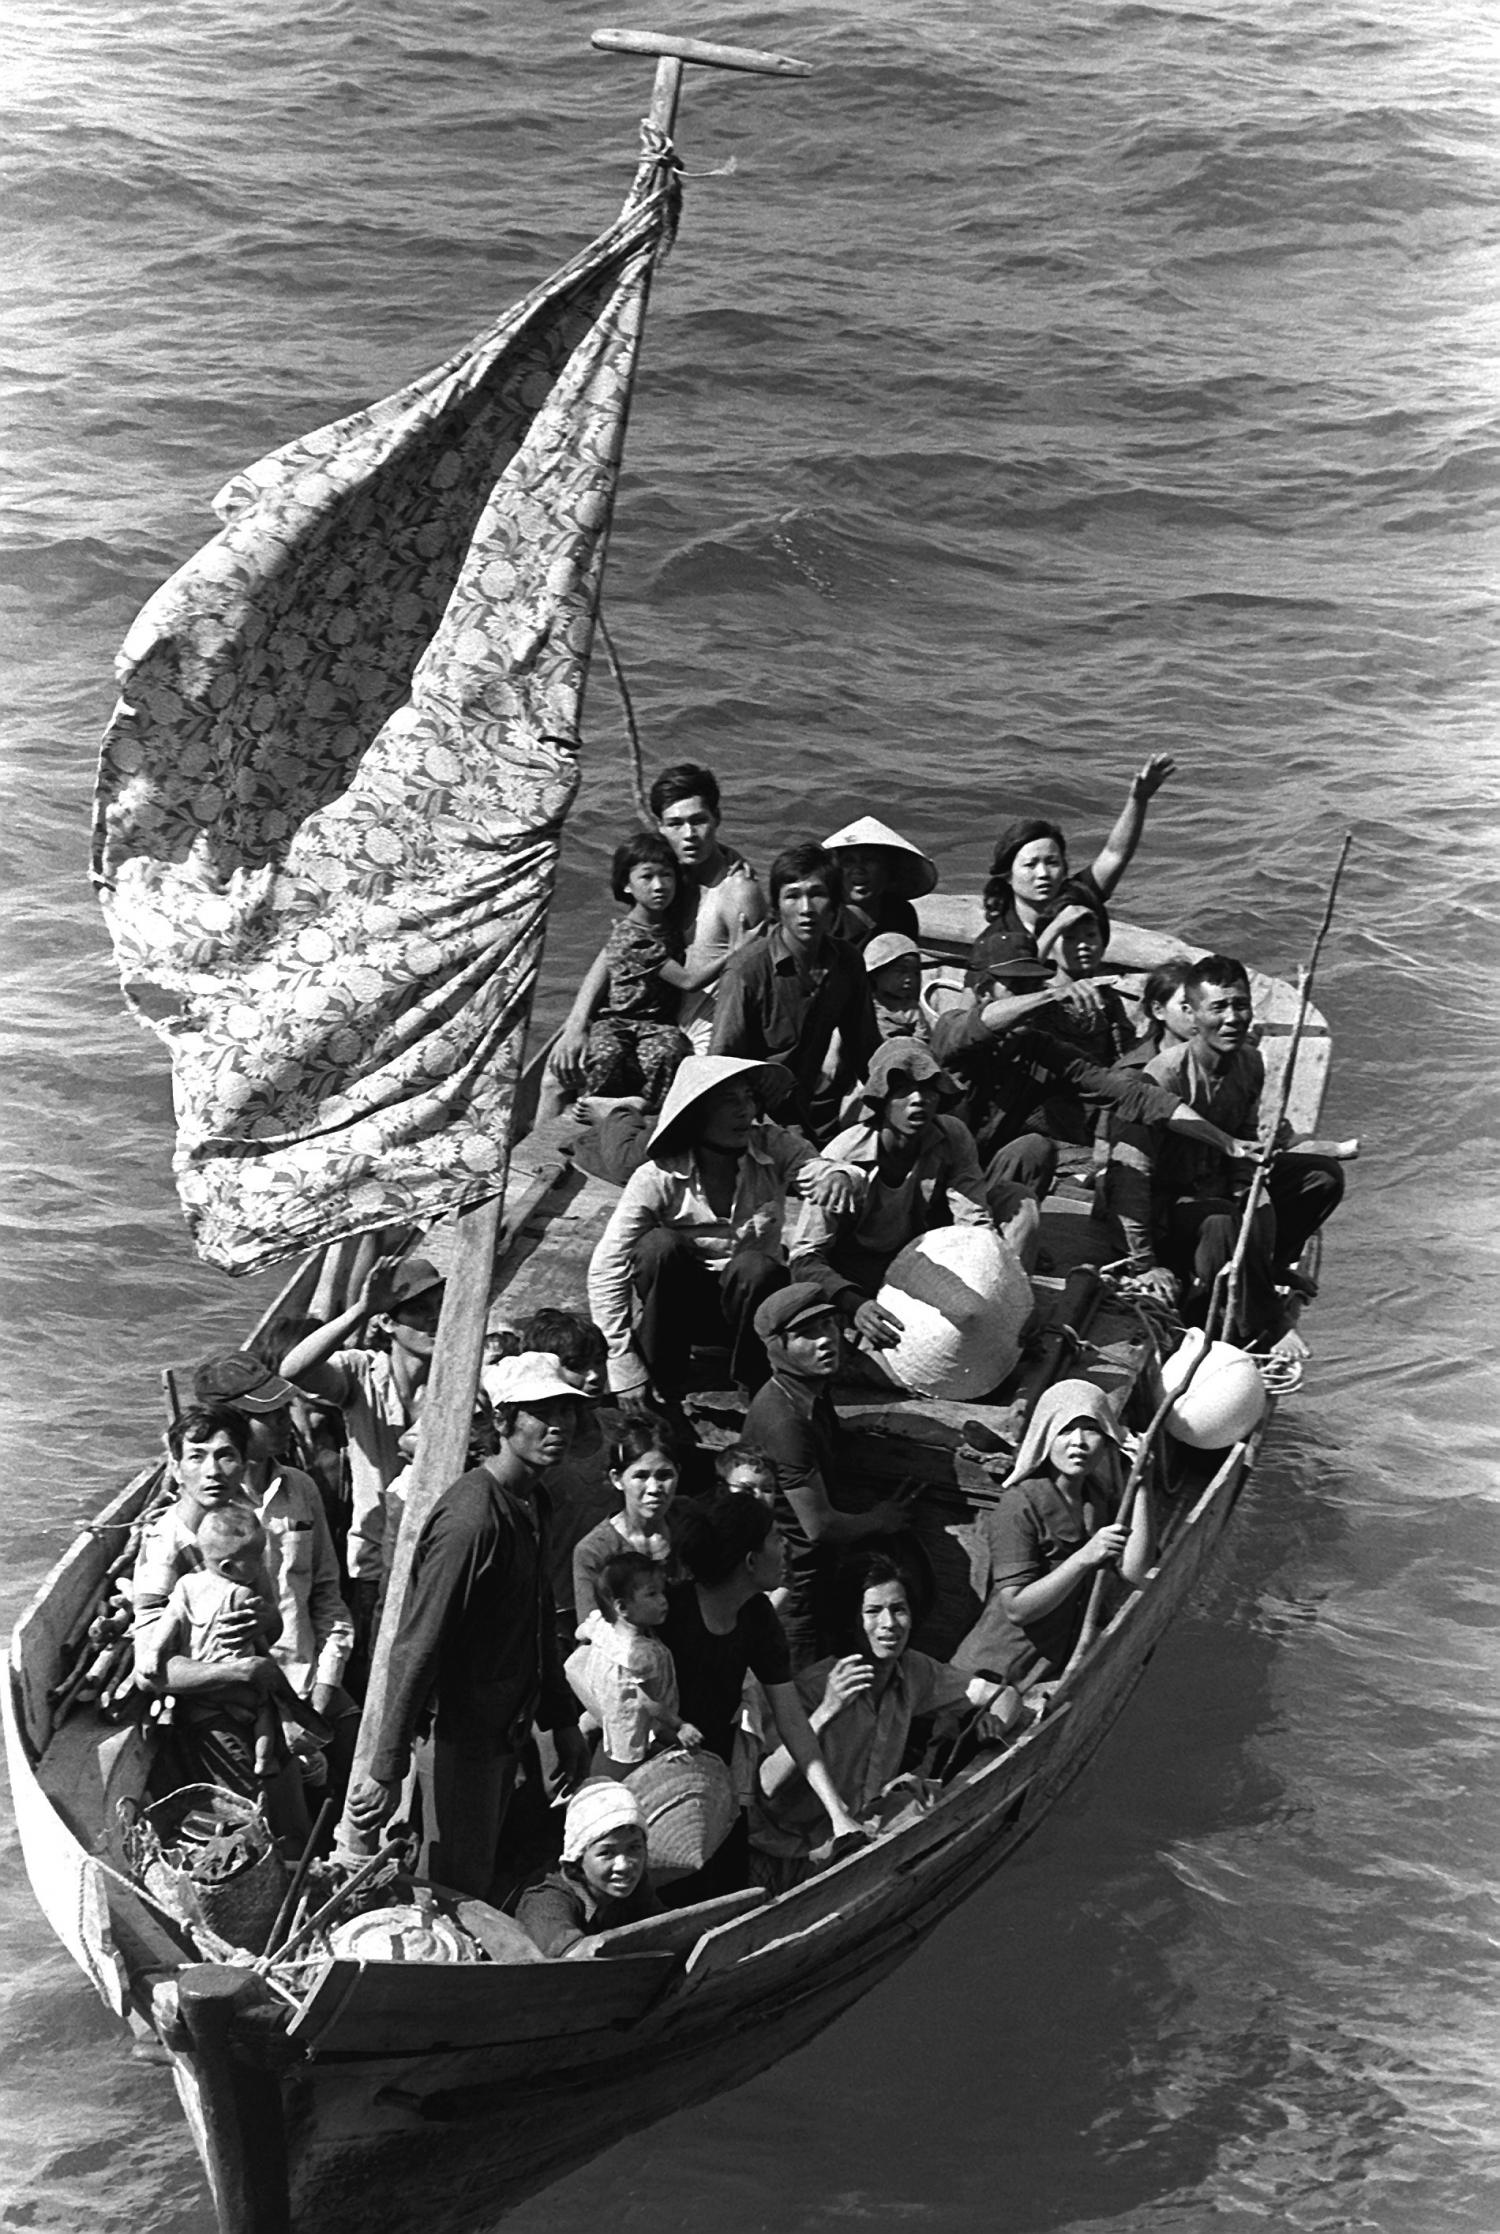 35 Vietnamese refugees wait to be taken aboard the amphibious command ship USS BLUE RIDGE (LCC-19). They are being rescued from a 35 foot fishing boat 350 miles northeast of Cam Ranh Bay, Vietnam, after spending eight days at sea